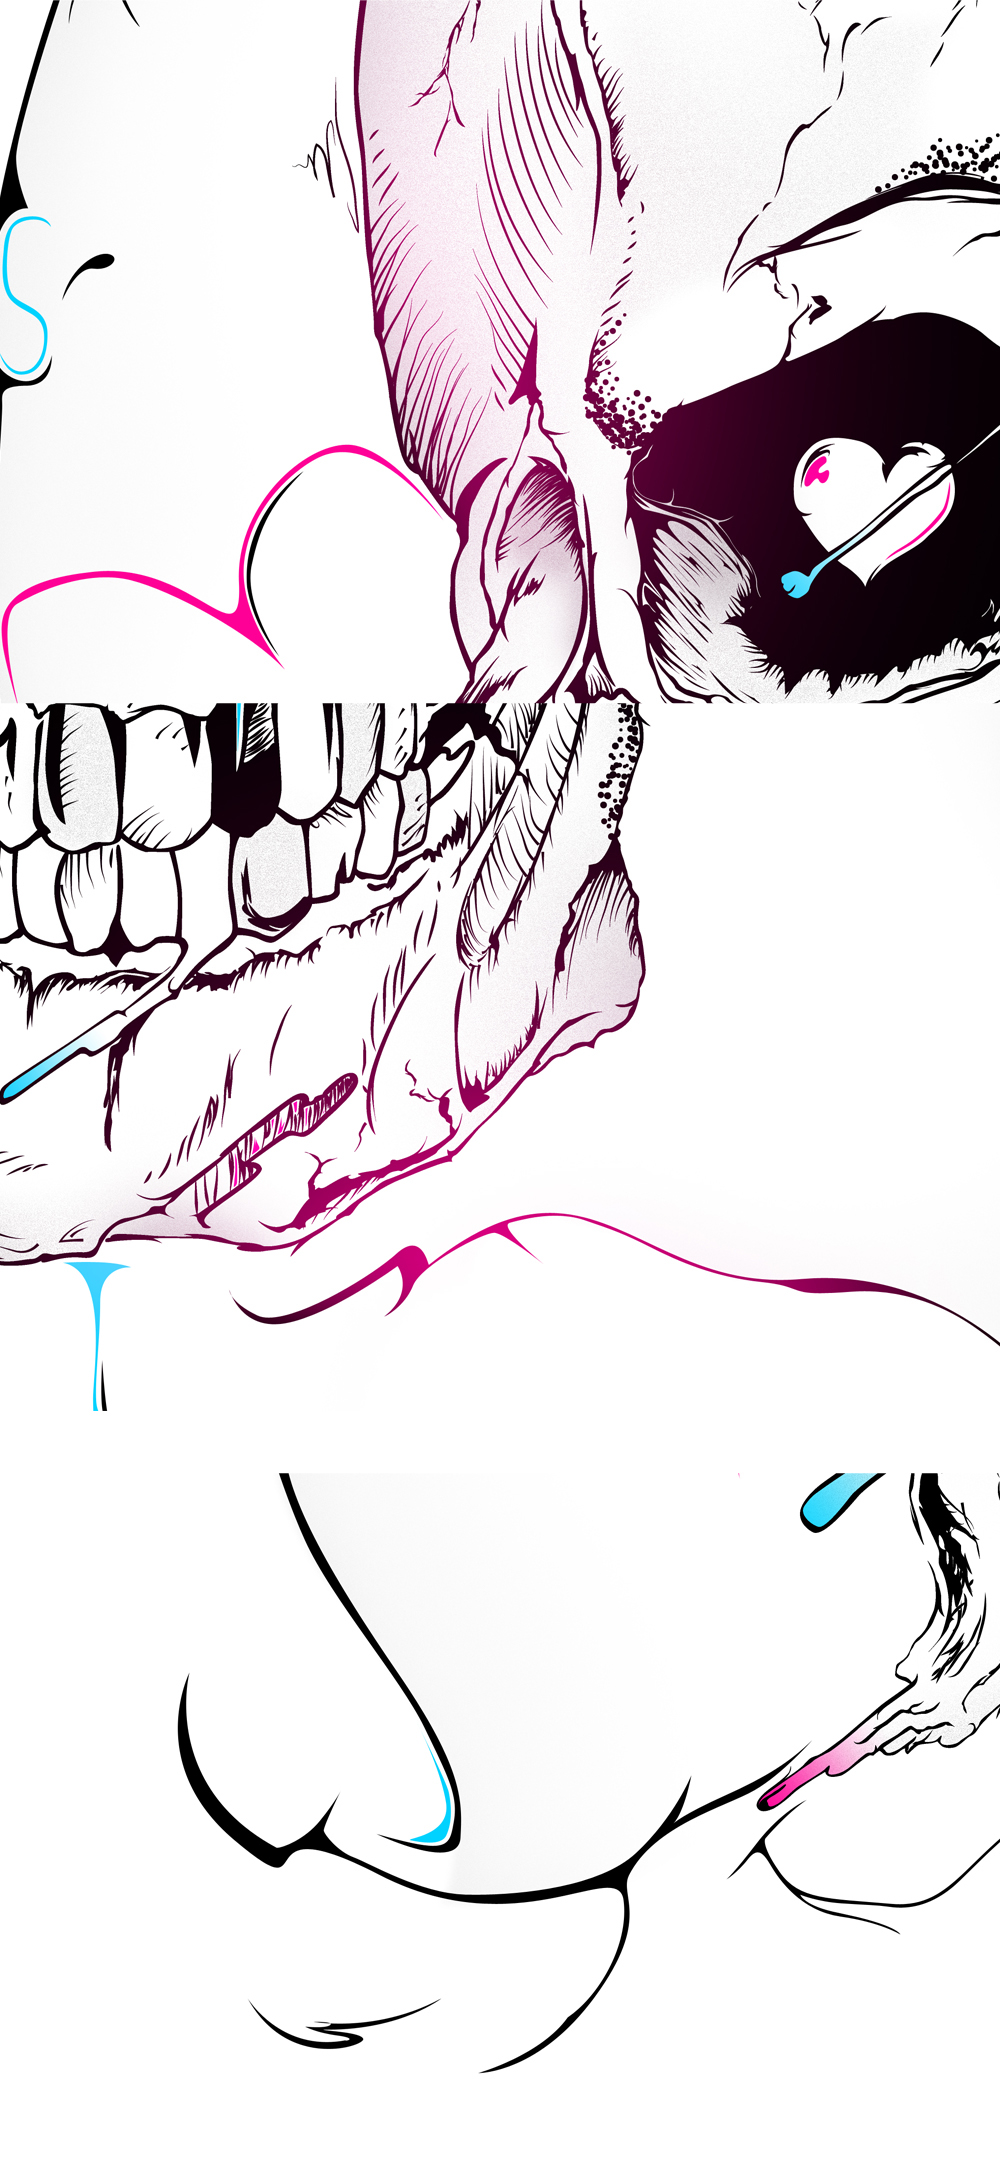 skull  Black  neon  Illustration  detail  Details  detailed  color  colored pencil  space  stars  ink  pencil  pen  realistic  human  skeleton  design  wallpaper  Pink   baby  blue  lines  line  liquid  fading  fade  transcience  image  making  of  artwork  print  high  quality  exhibition  series  black neon detail details detailed color colored pencil Space  stars ink pencil pen realistic human skeleton wallpaper pink baby blue lines line Liquid fading Fade transcience image making of artwork print high Quality Exhibition  series